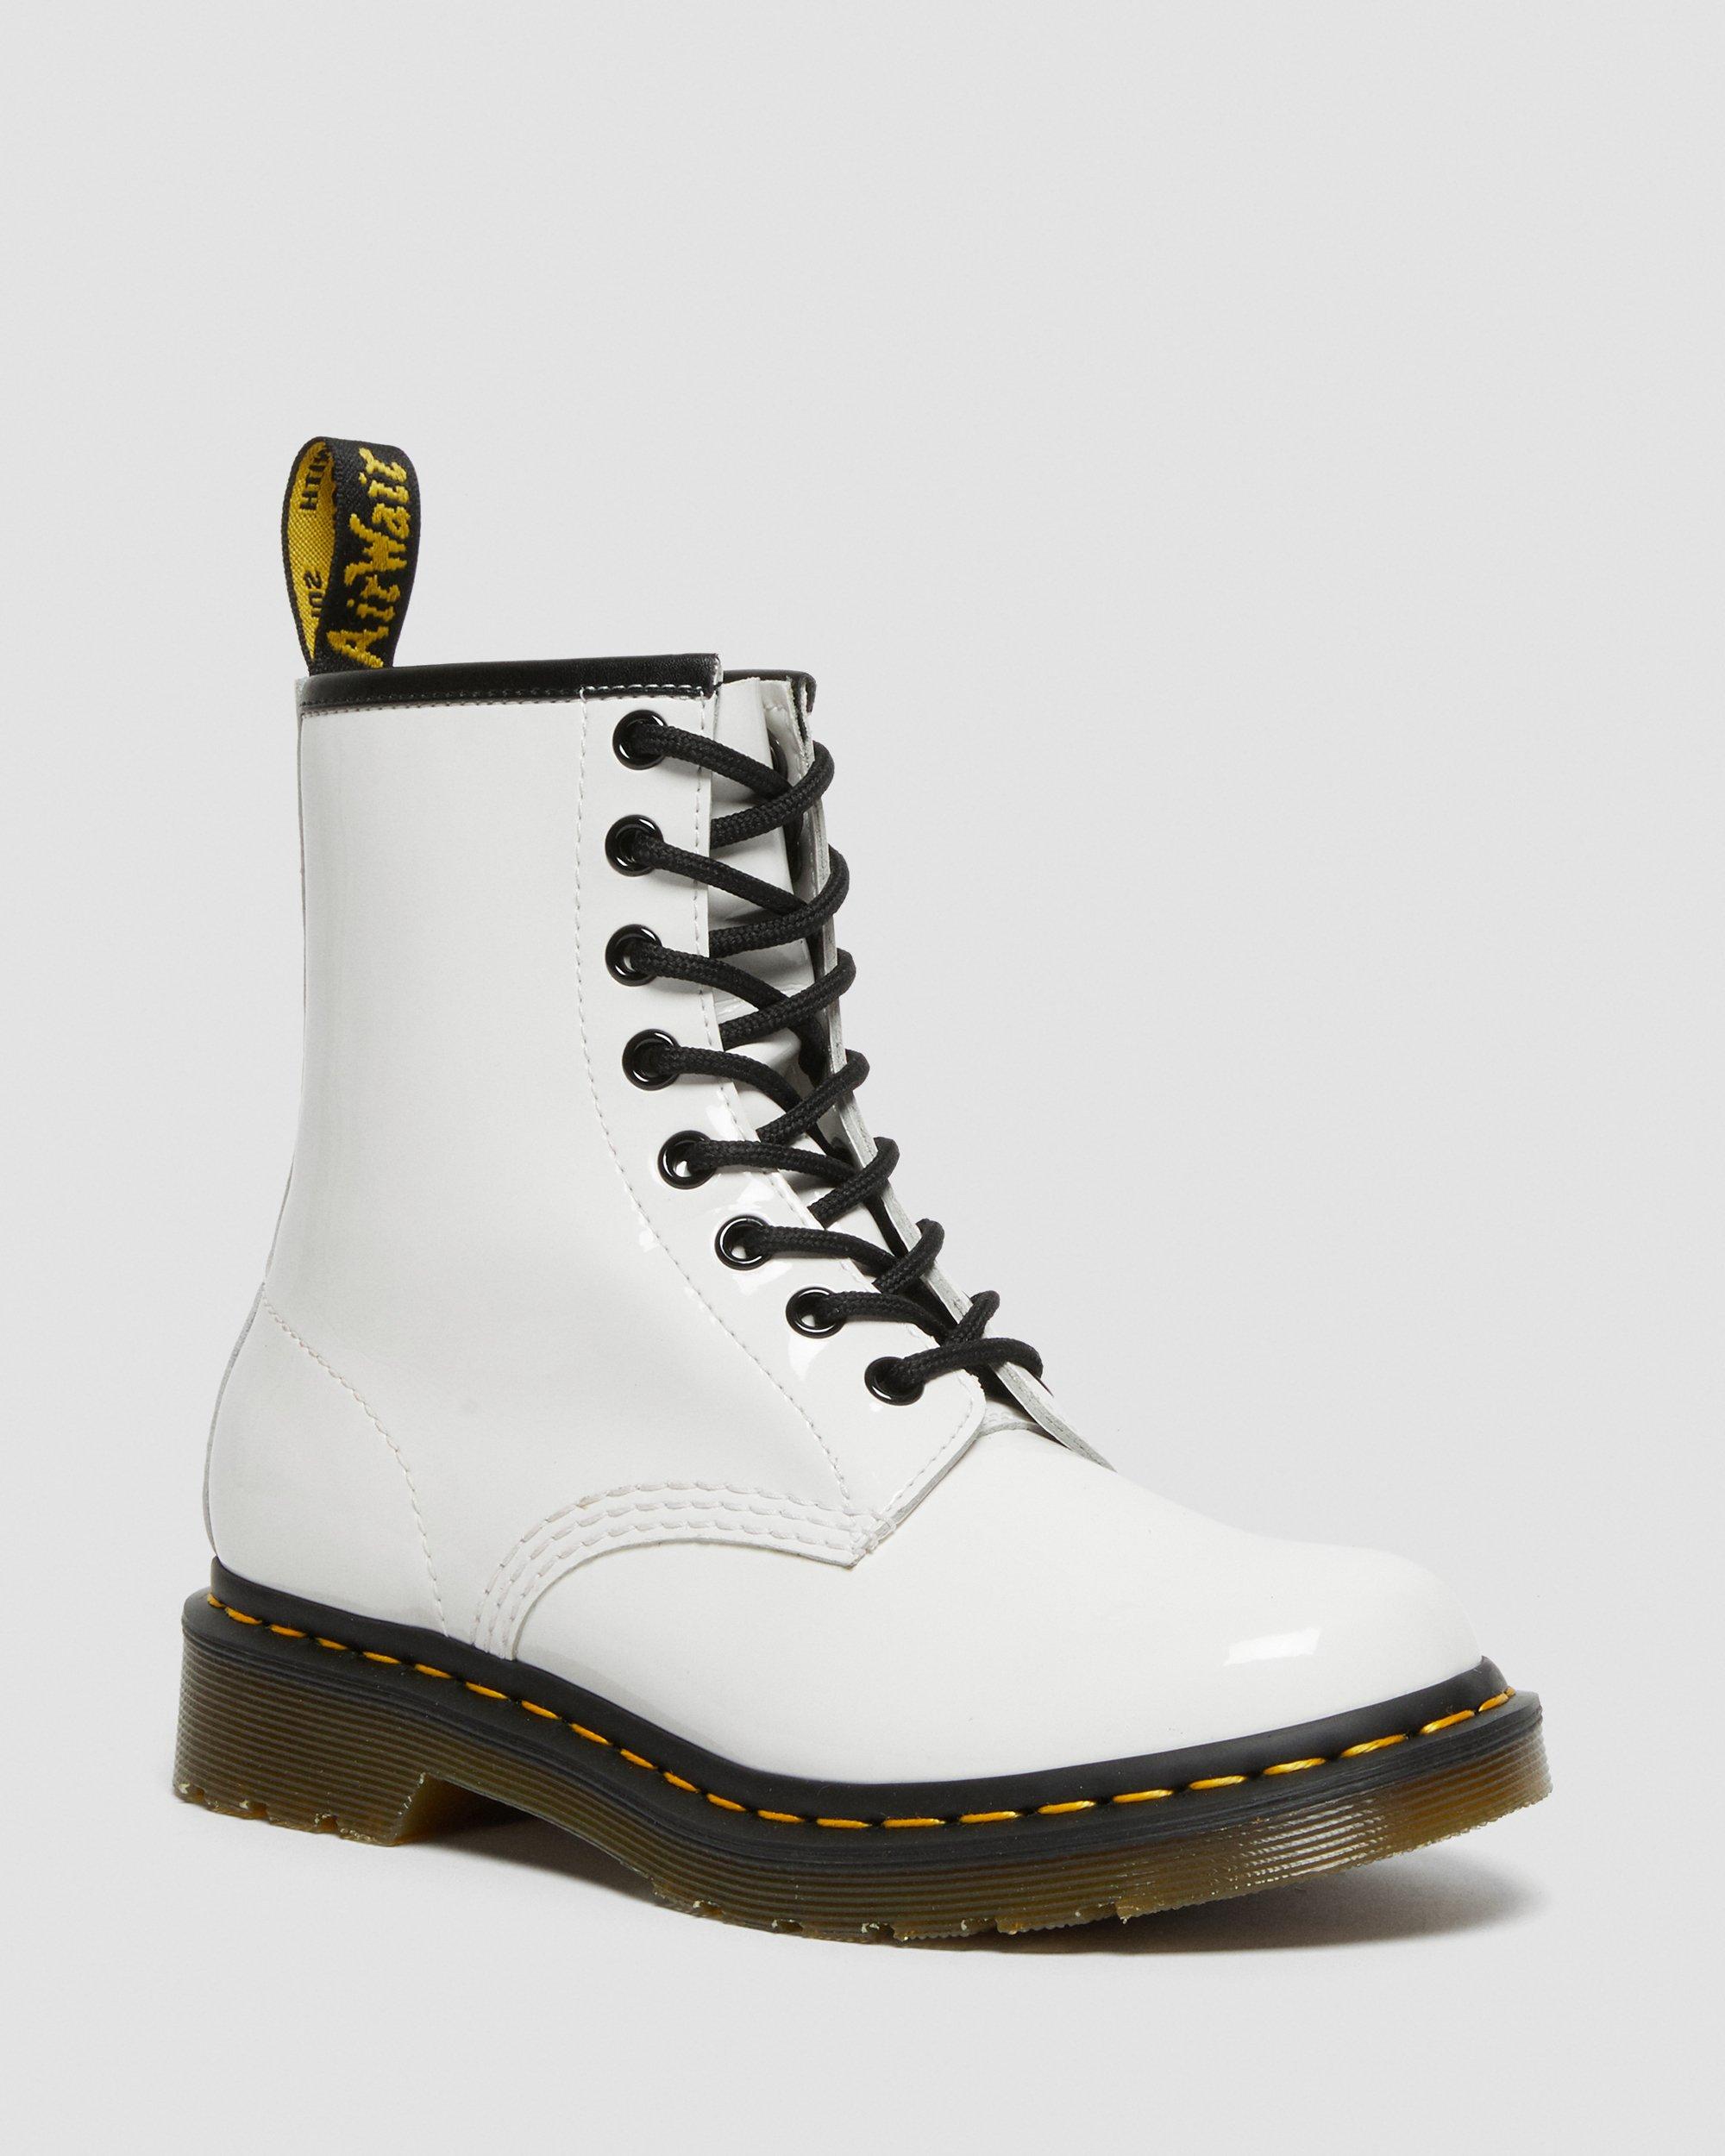 1460 Women's Patent Leather Lace Up Boots | Dr. Martens